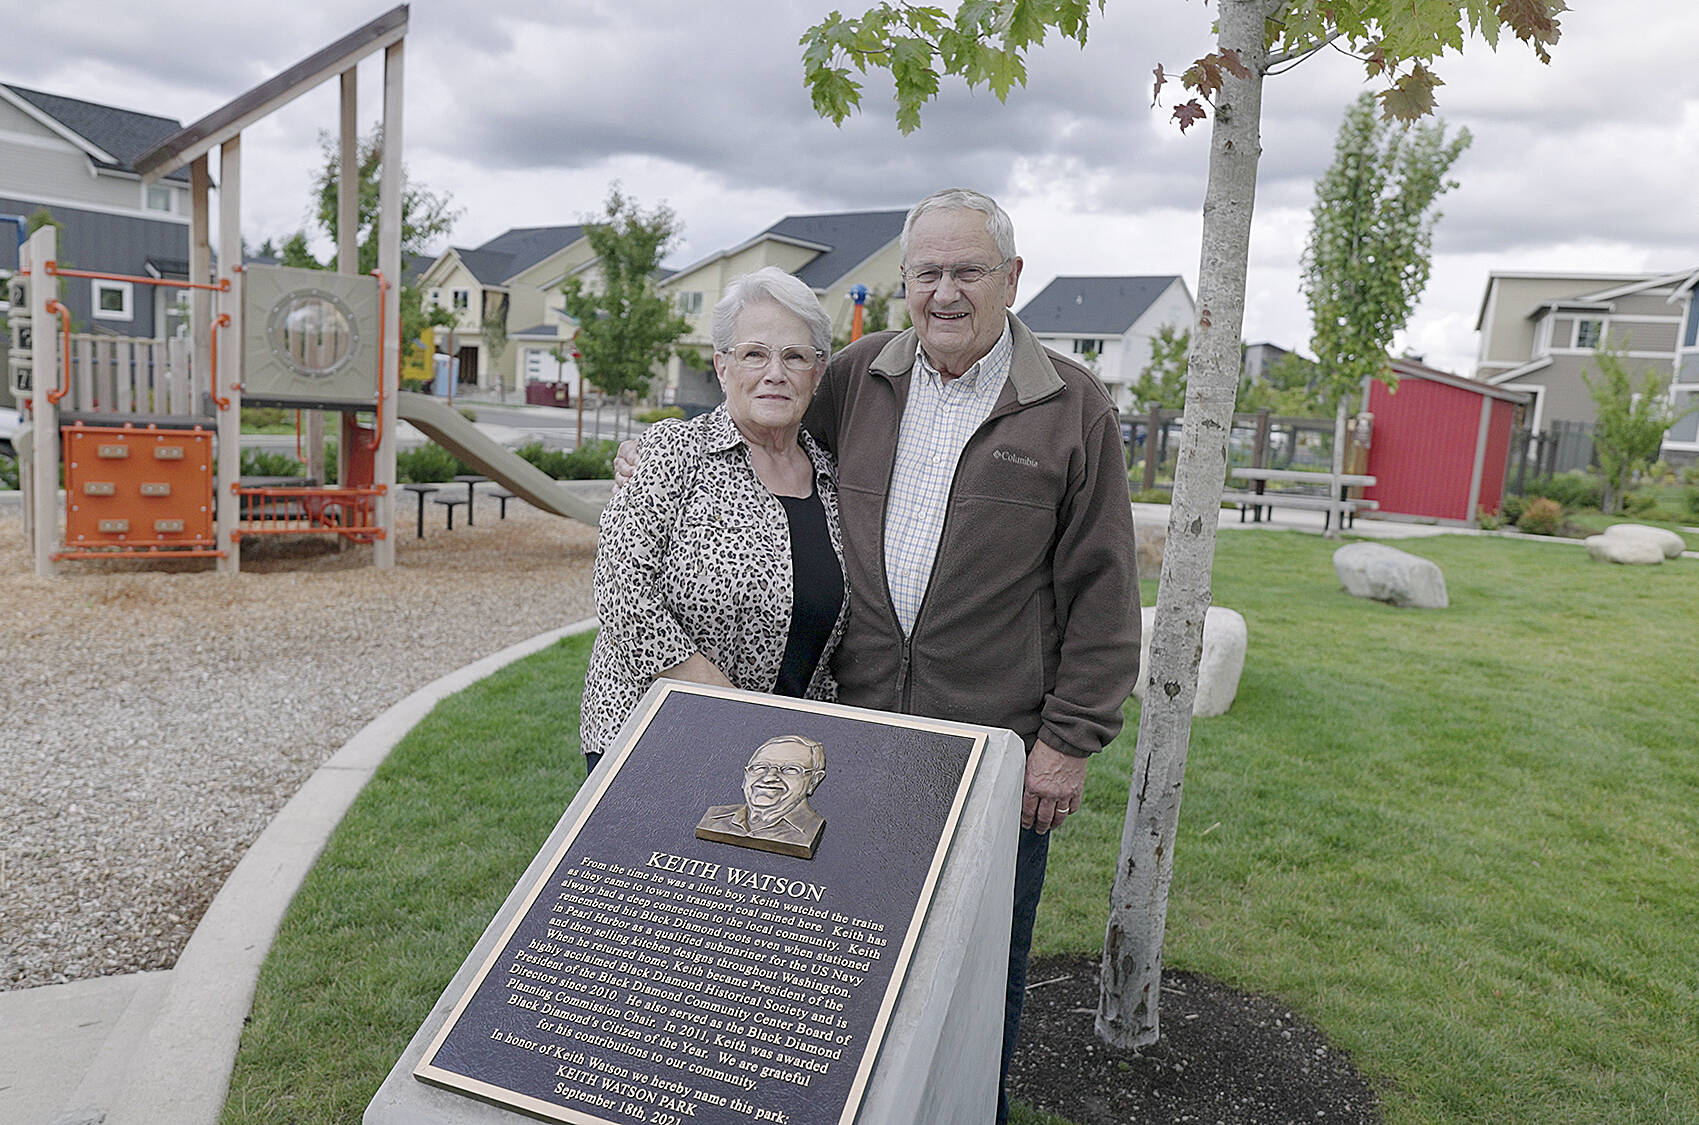 Keith Watson and his wife Judy at the newly-renamed Keith Watson Park, located at the intersection of SE Cottonwood Street and Birch Ave SE. The plaque at the park gives a short history of Watson’s involvement in Black Diamond. Courtesy photo